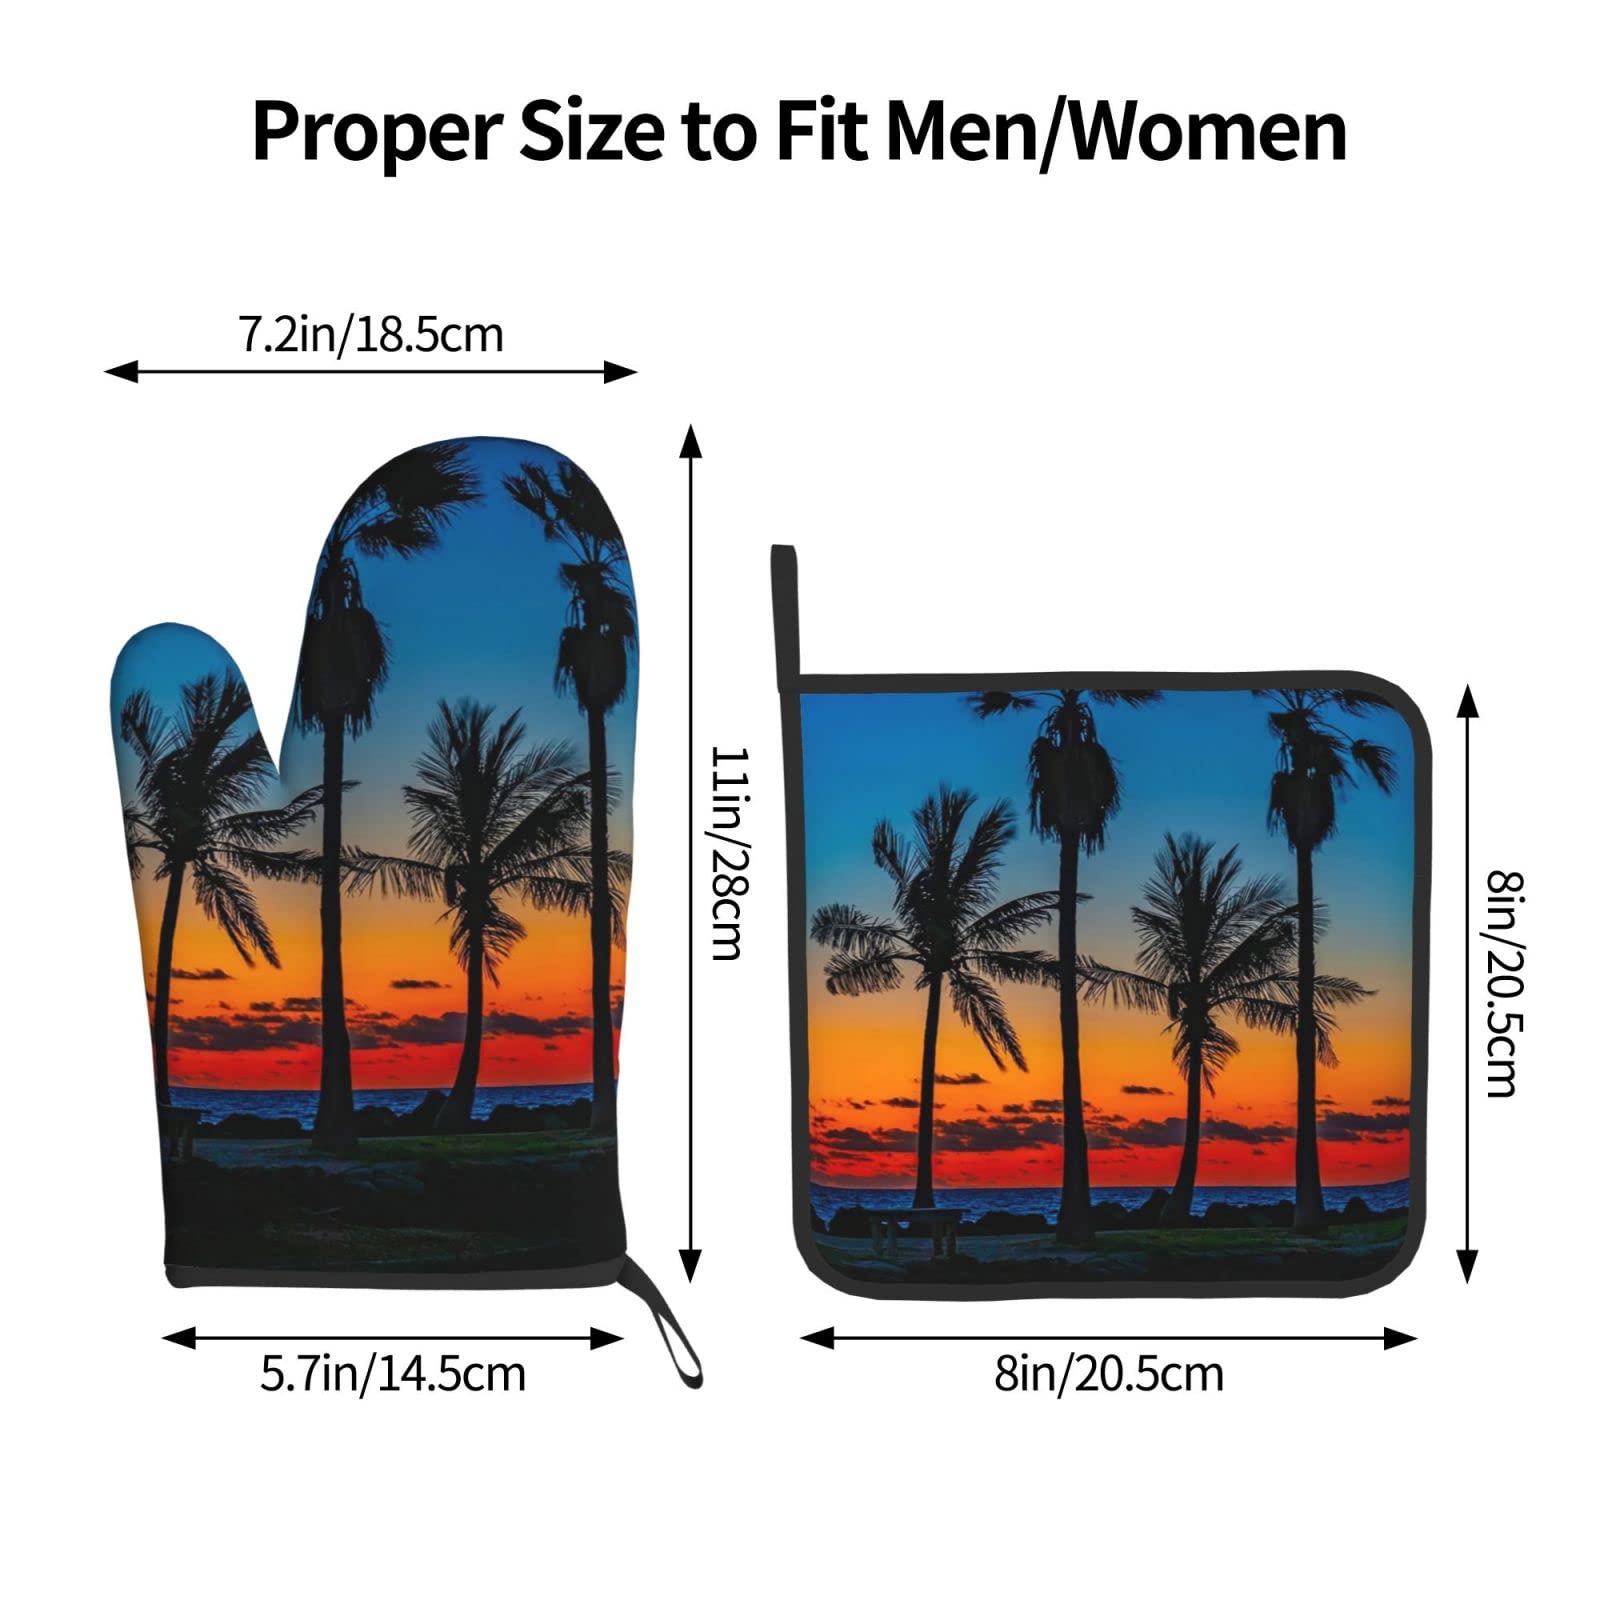 Sunset Beach Palm Tree Oven Mitts and Pot Holders Sets of 2, Non-Slip Cooking Hot Pads Washable Heat Resistant for Kitchen Microwave BBQ Baking Grilling